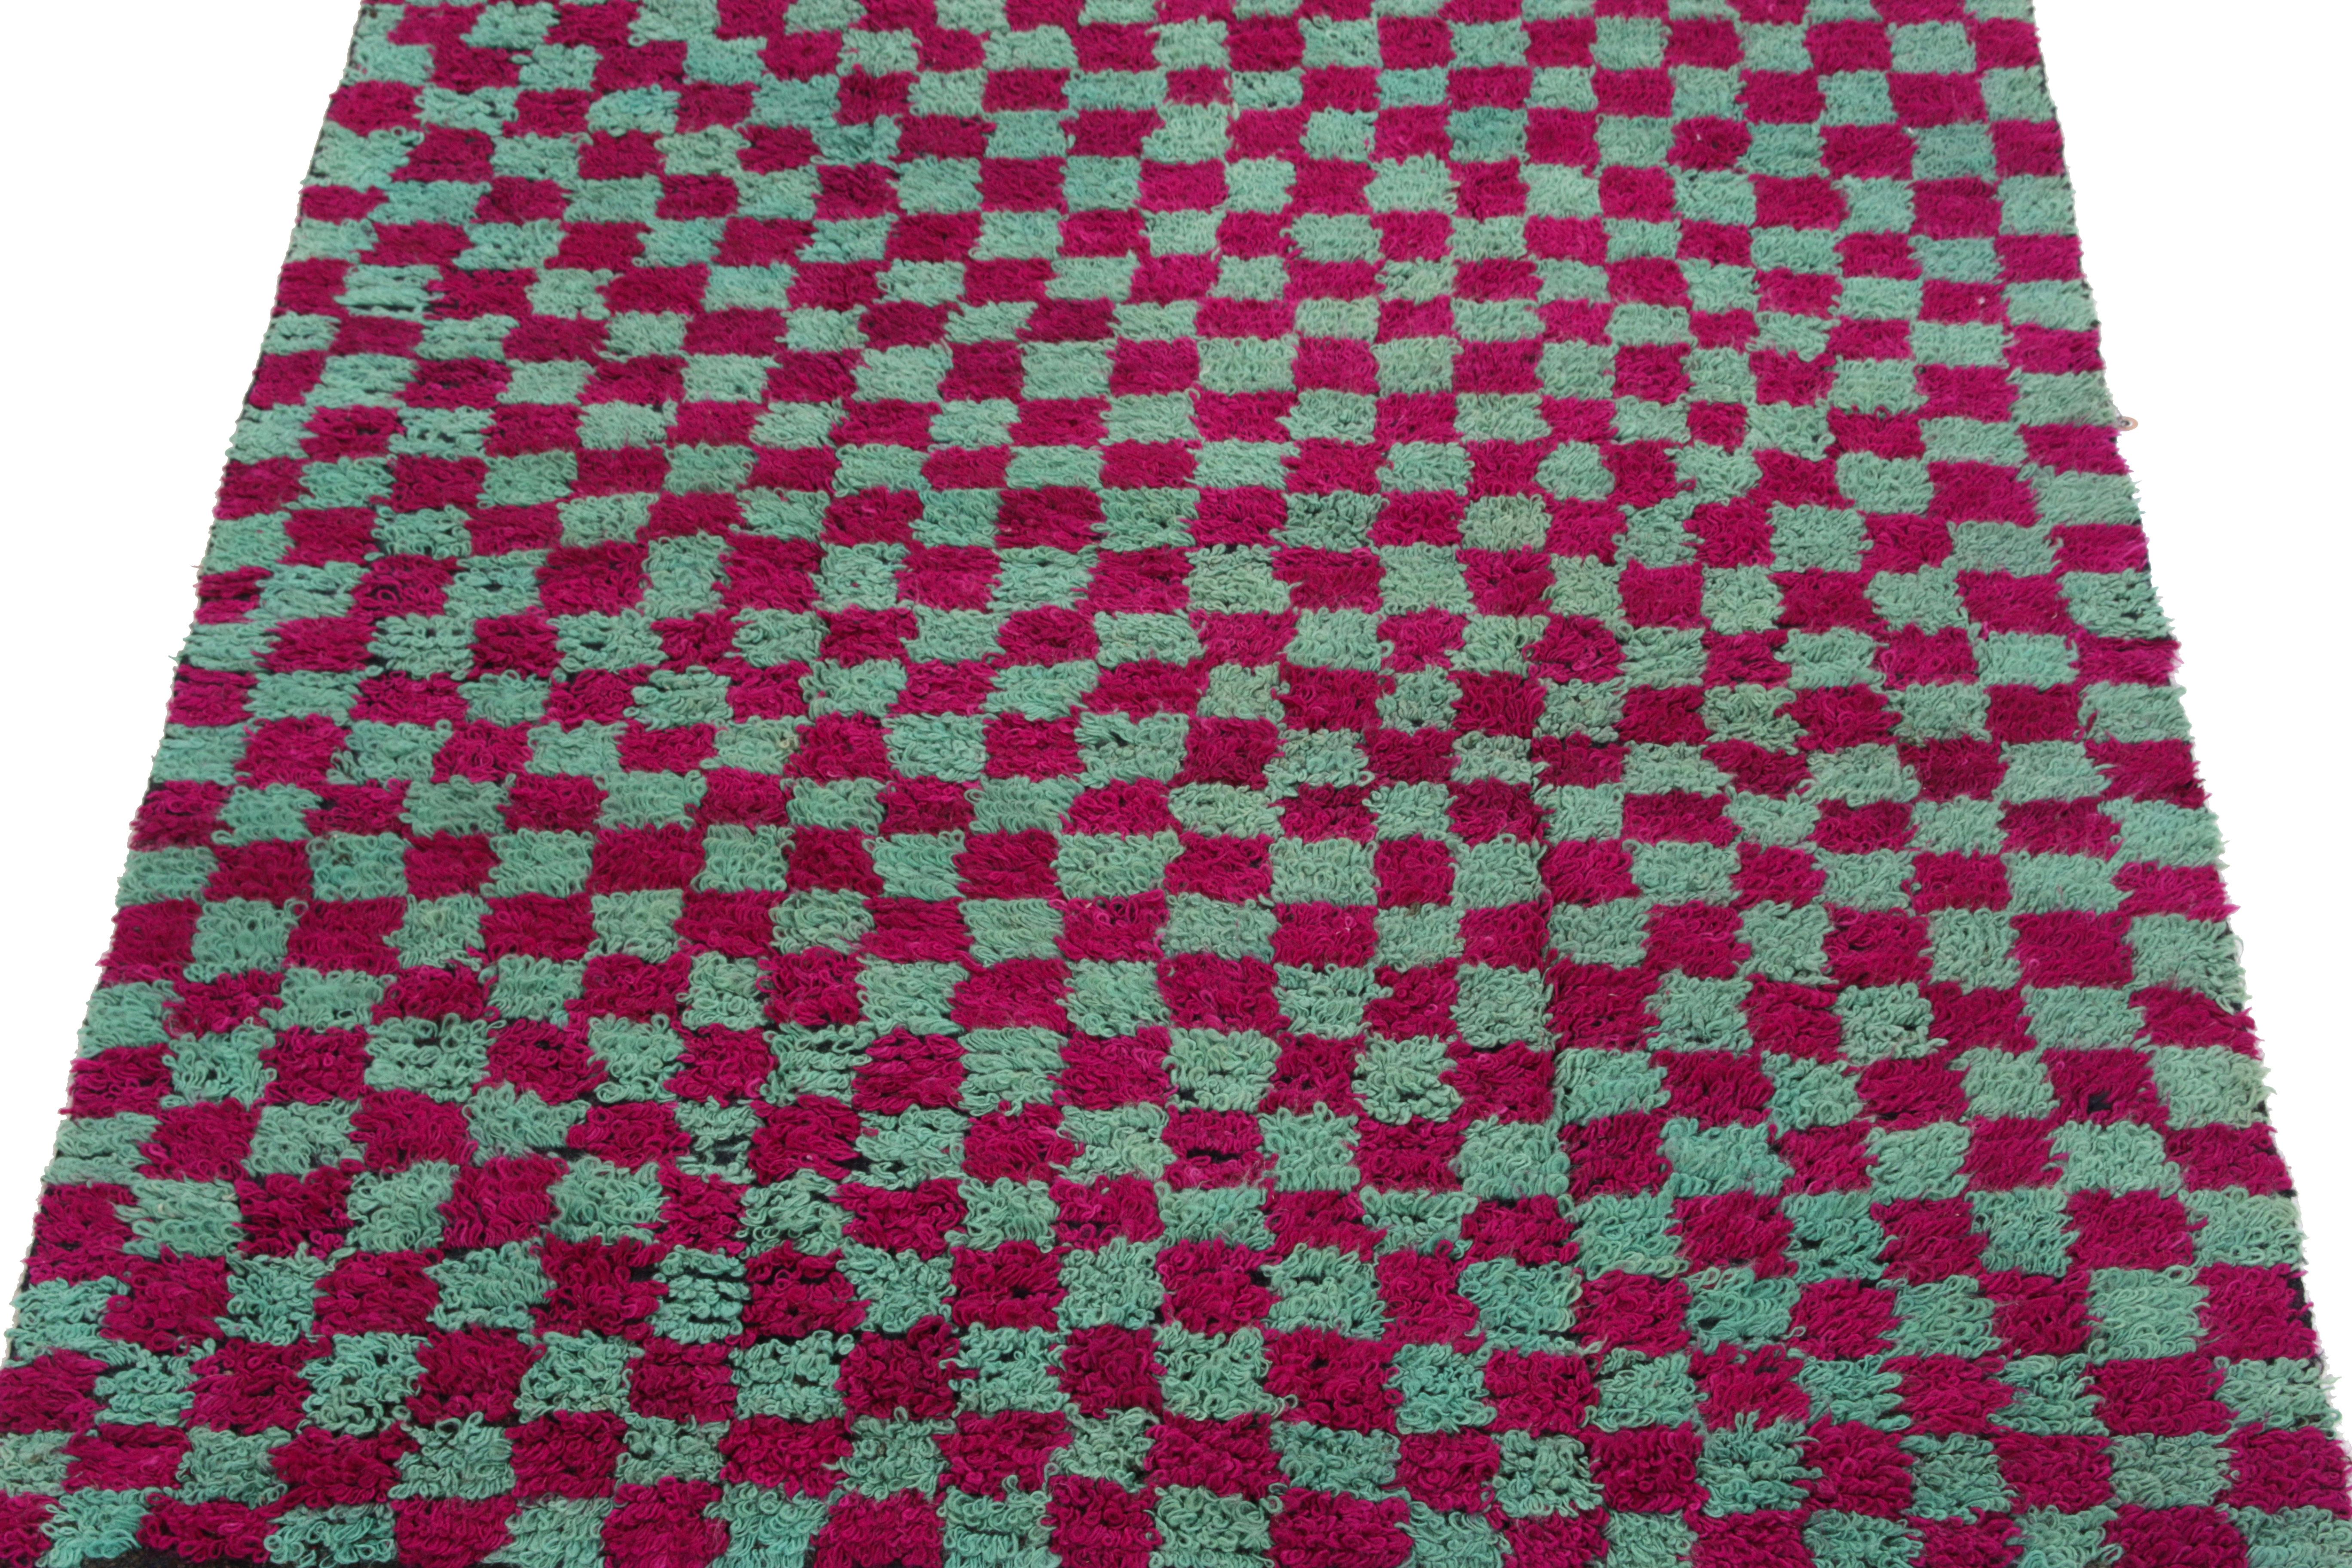 Hand-knotted in wool, a 4x5 vintage Tulu rug originating from Turkey circa 1950-1960, now joining Rug & Kilim’s Antique & Vintage collection. The healthy loop pile features a well defined checkered pattern in magenta & blue for delicious symmetry